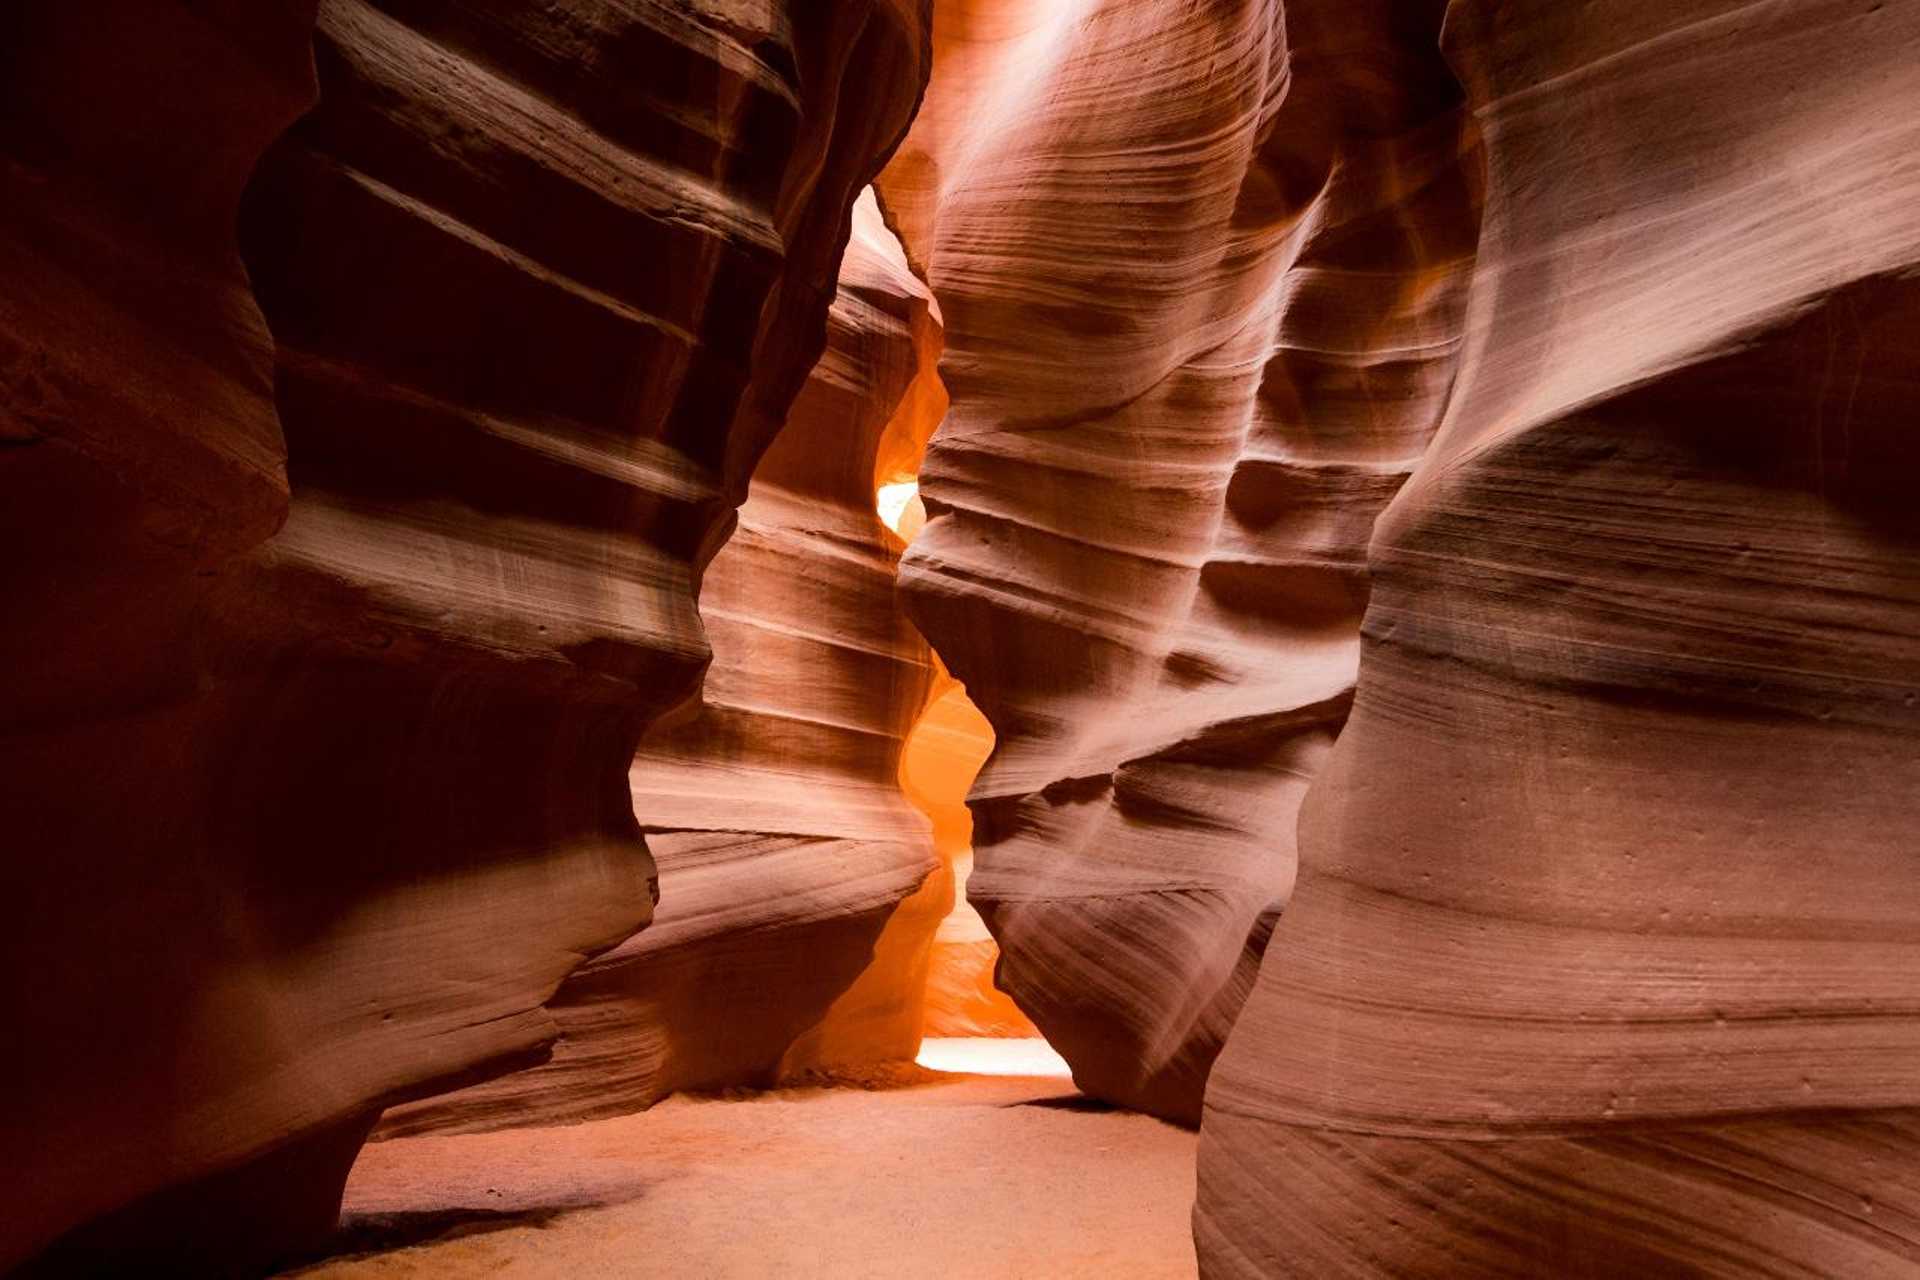 Private Upper Antelope Canyon & Horseshoe Bend Tour (up to 10 people) from Las Vegas